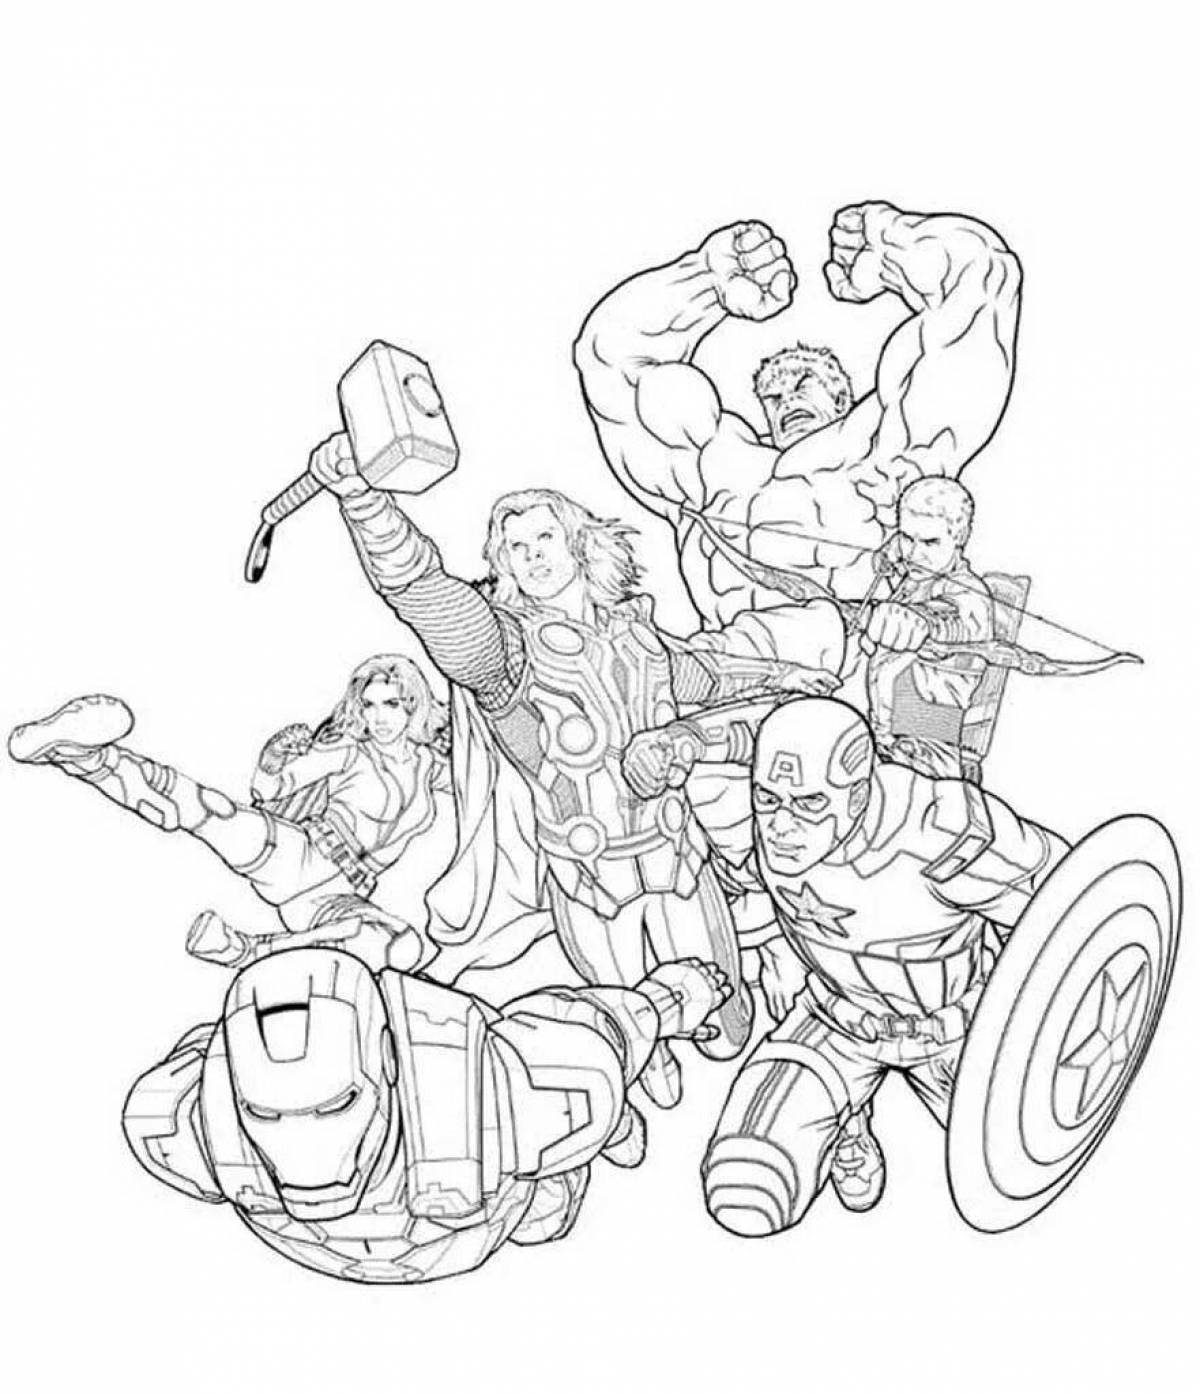 Fearless Avengers Coloring Pages